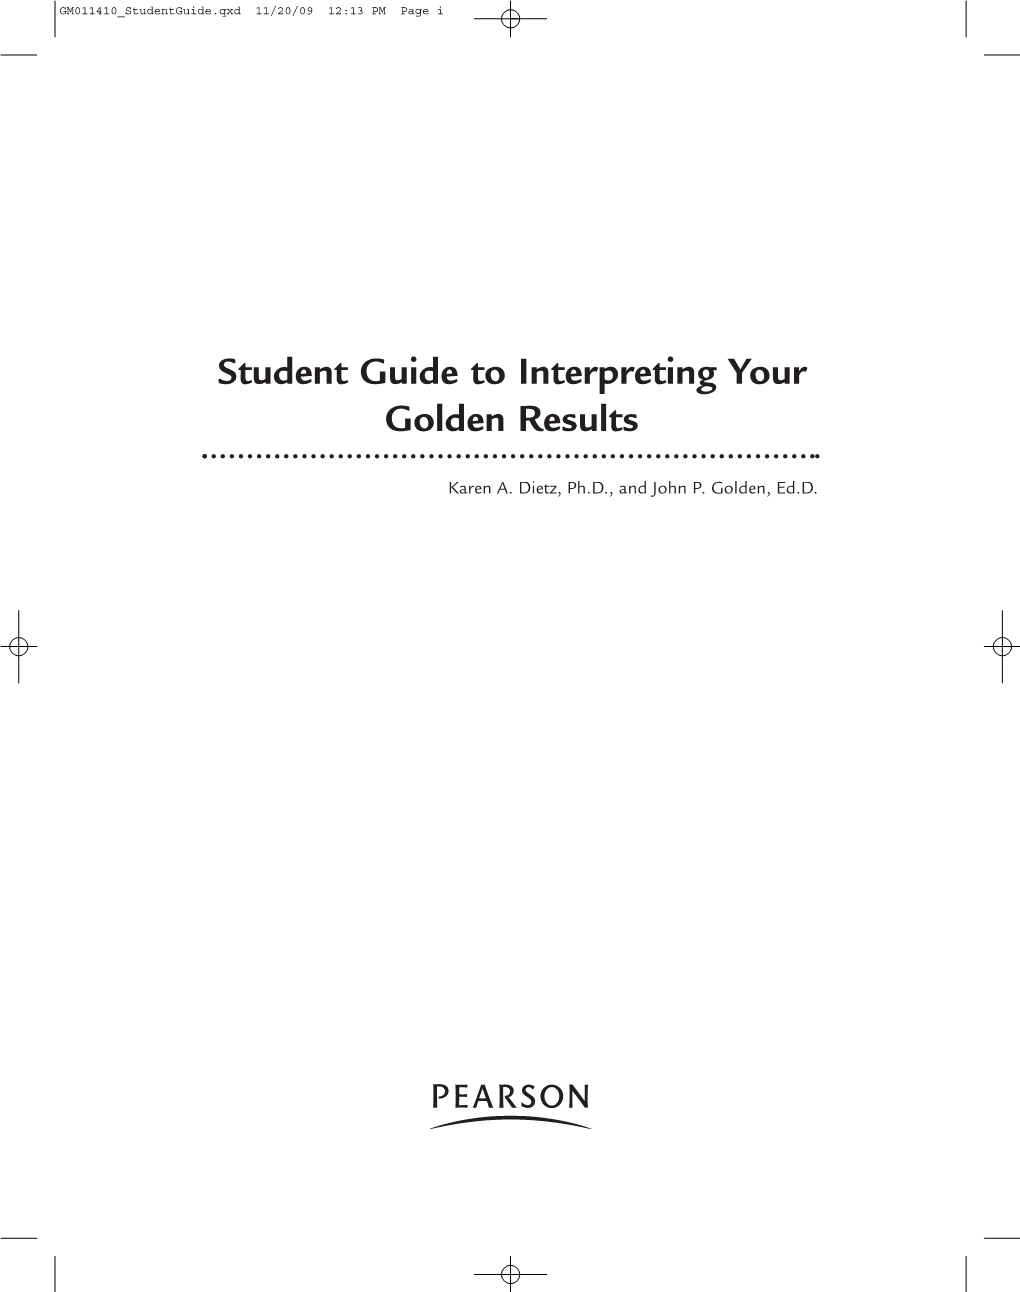 Student Guide to Interpreting Your Golden Results